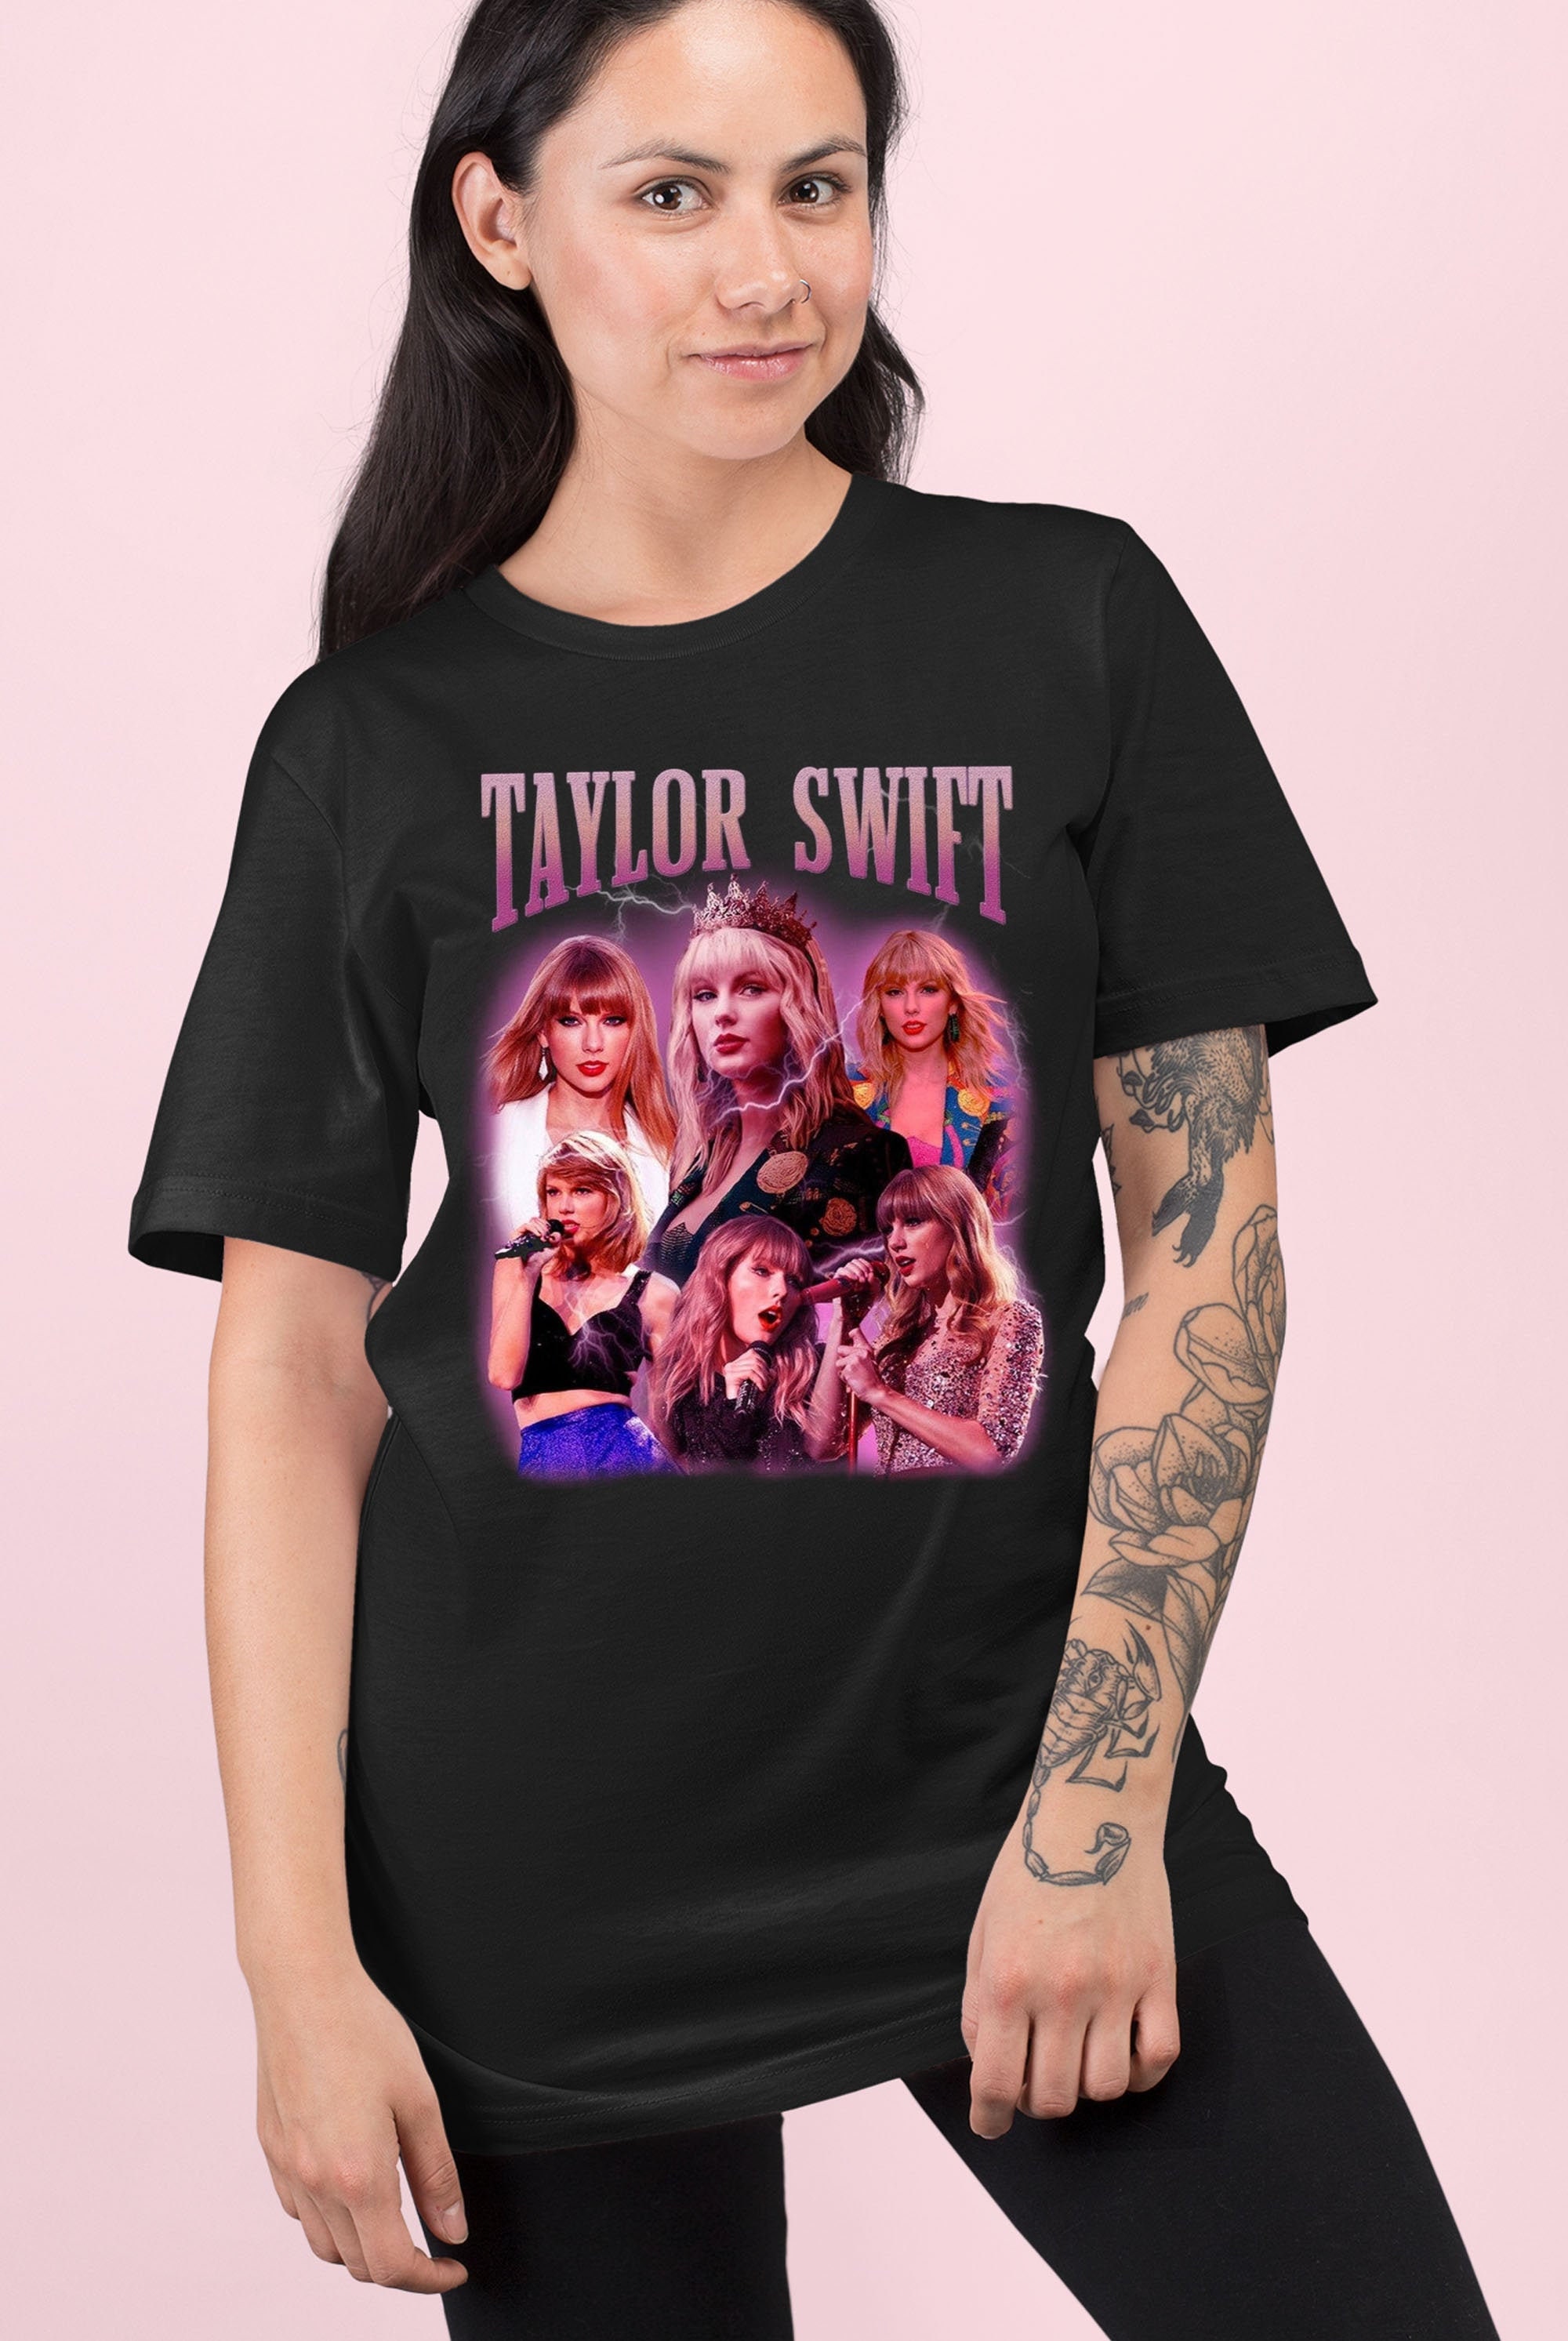 Taylor Folklore Shirt Tswift Taylor Swifty Taylor | Etsy